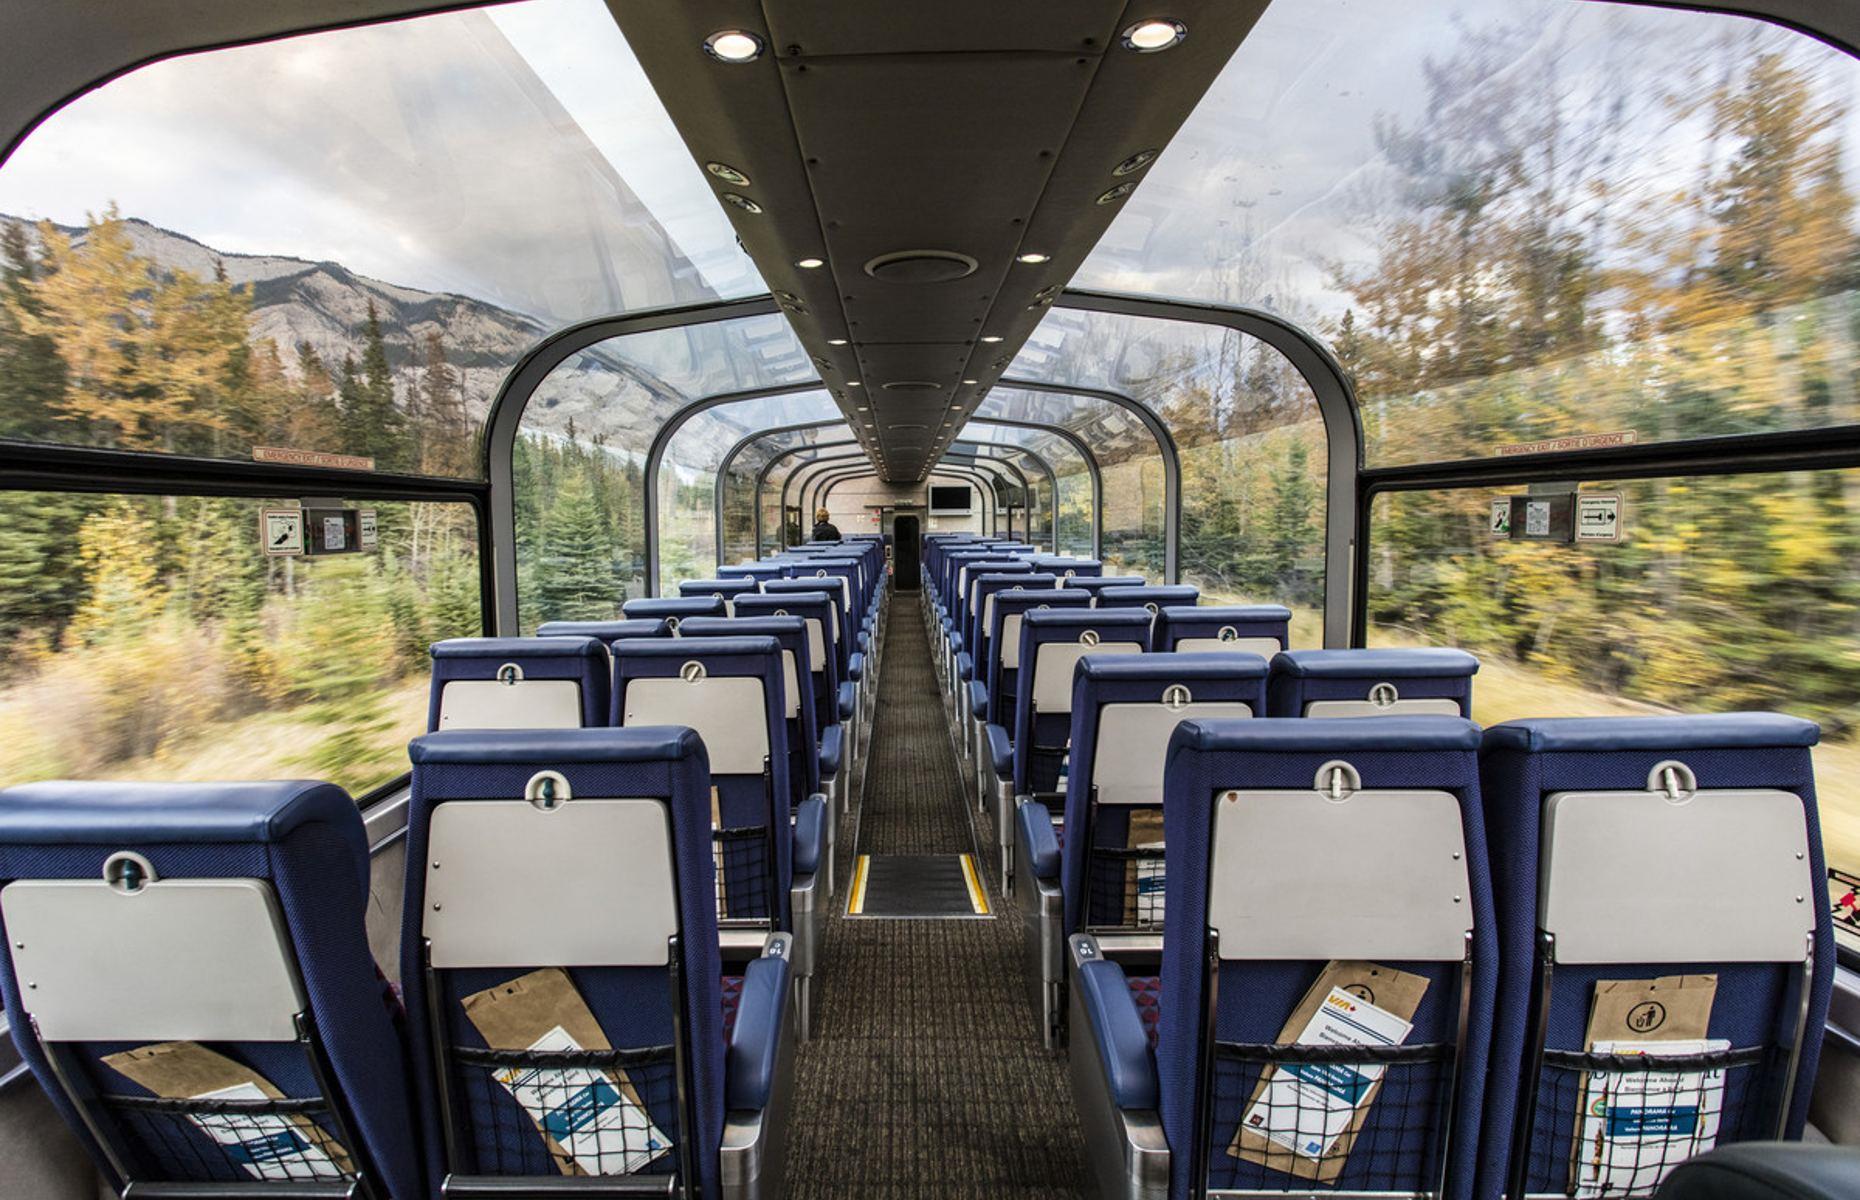 Seating and carriage options are the same as those offered on VIA Rail’s The Canadian, although there’s no Prestige Class option. Economy tickets start at around C$137 ($107), while Sleeper Plus tickets start from C$473 (US$371) for a cabin for two. As for food, those in Sleeper class can enjoy a complimentary three-course meal accompanied by Canadian wines, or there’s a good selection of snacks and light meals available for Economy passengers.